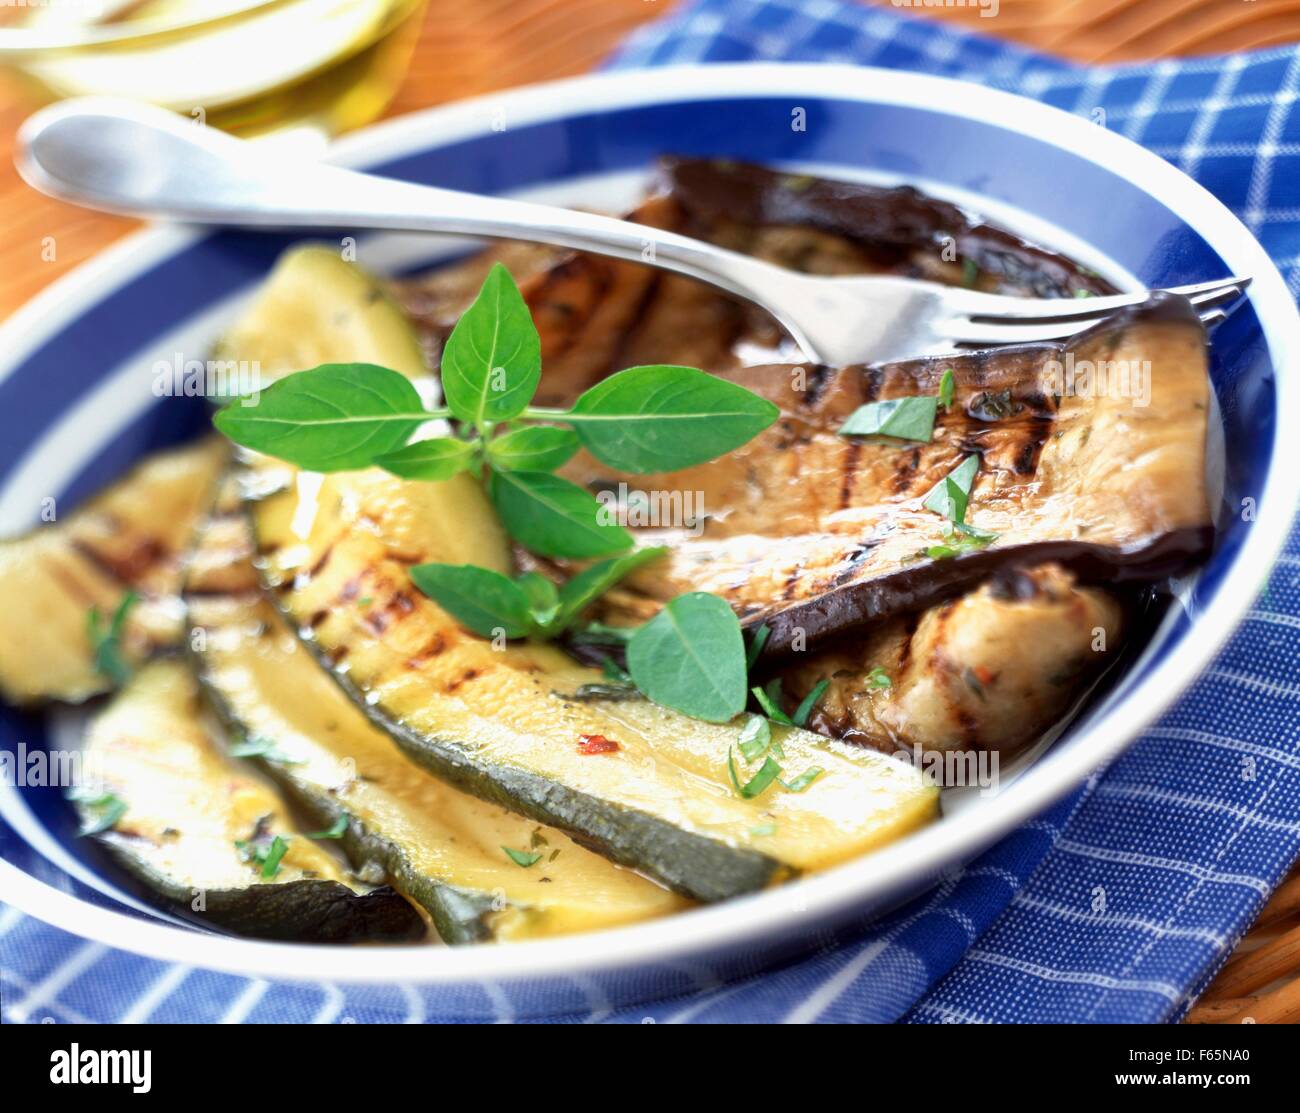 Grilled courgette and aubergine antipasti Stock Photo